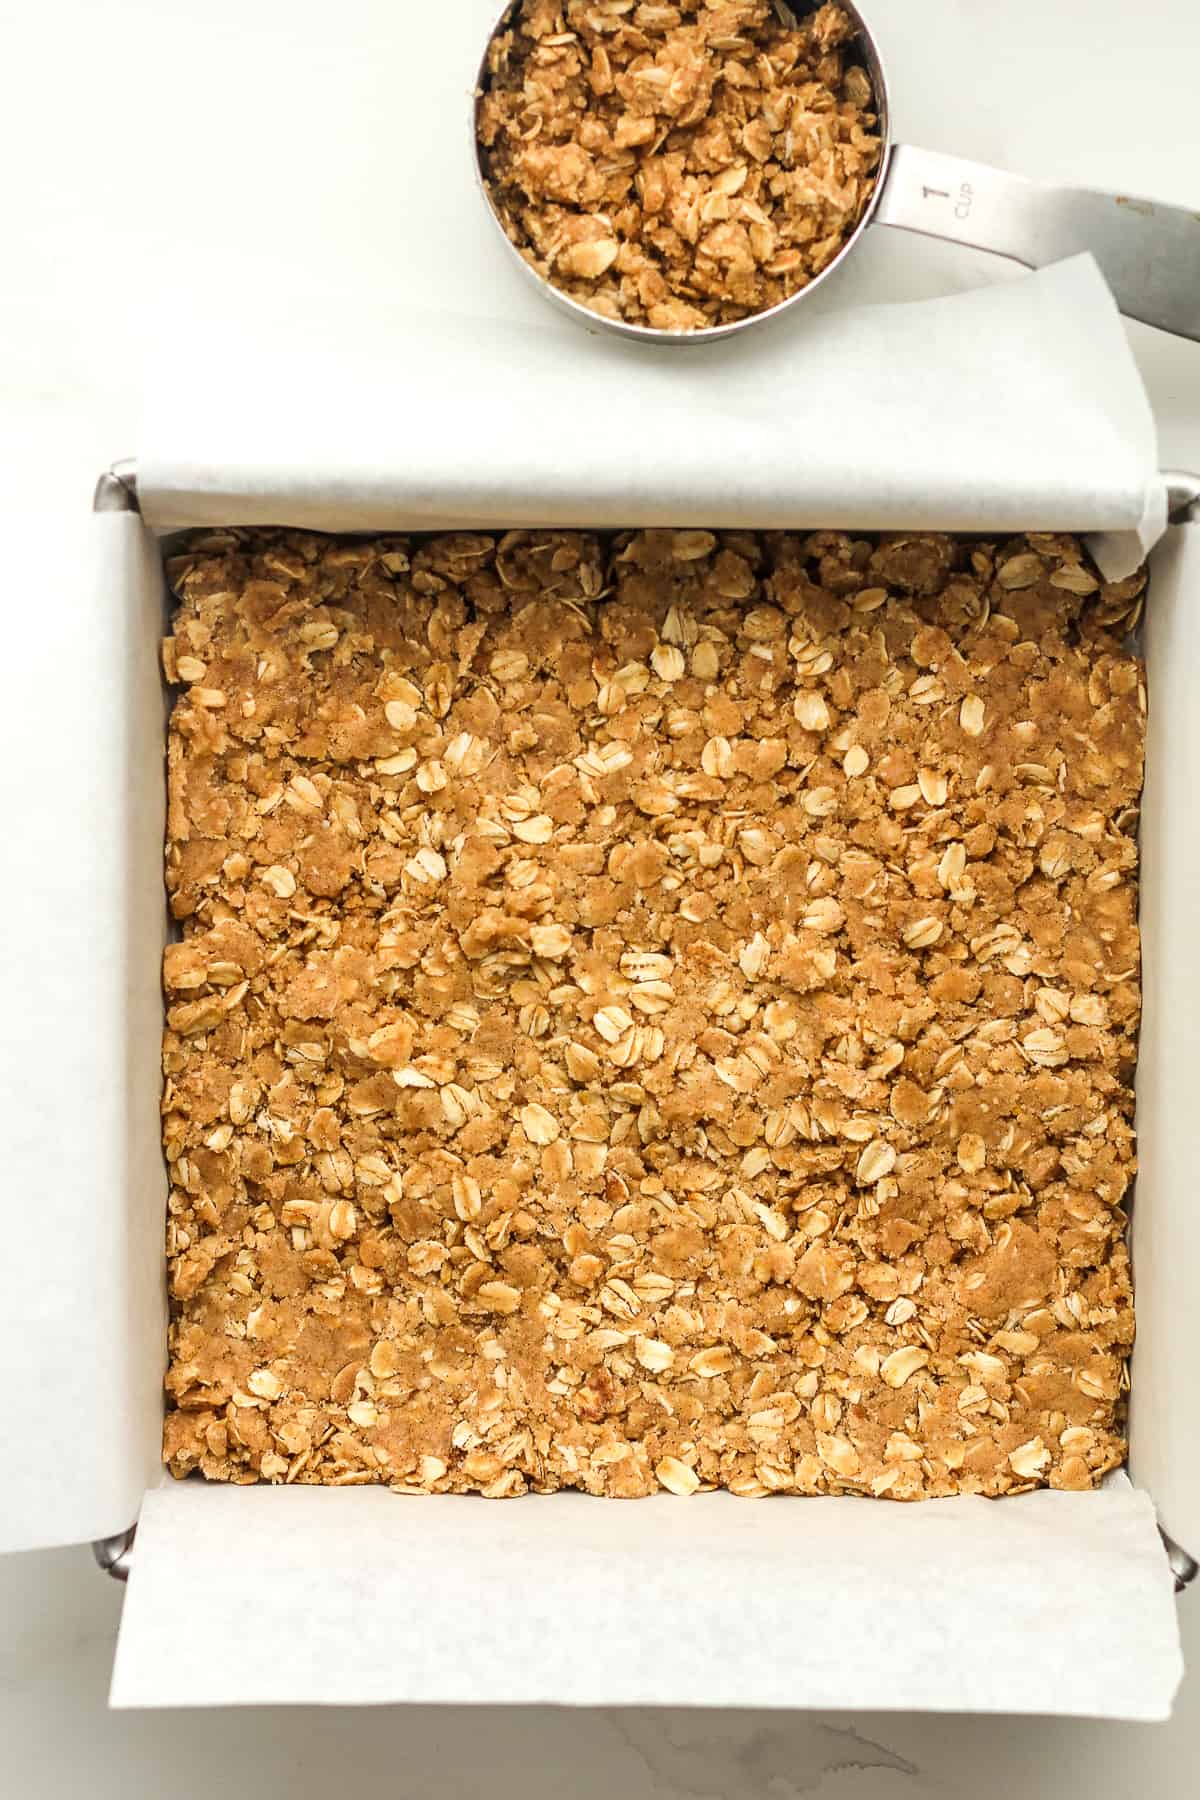 A square pan of the oatmeal mixture.